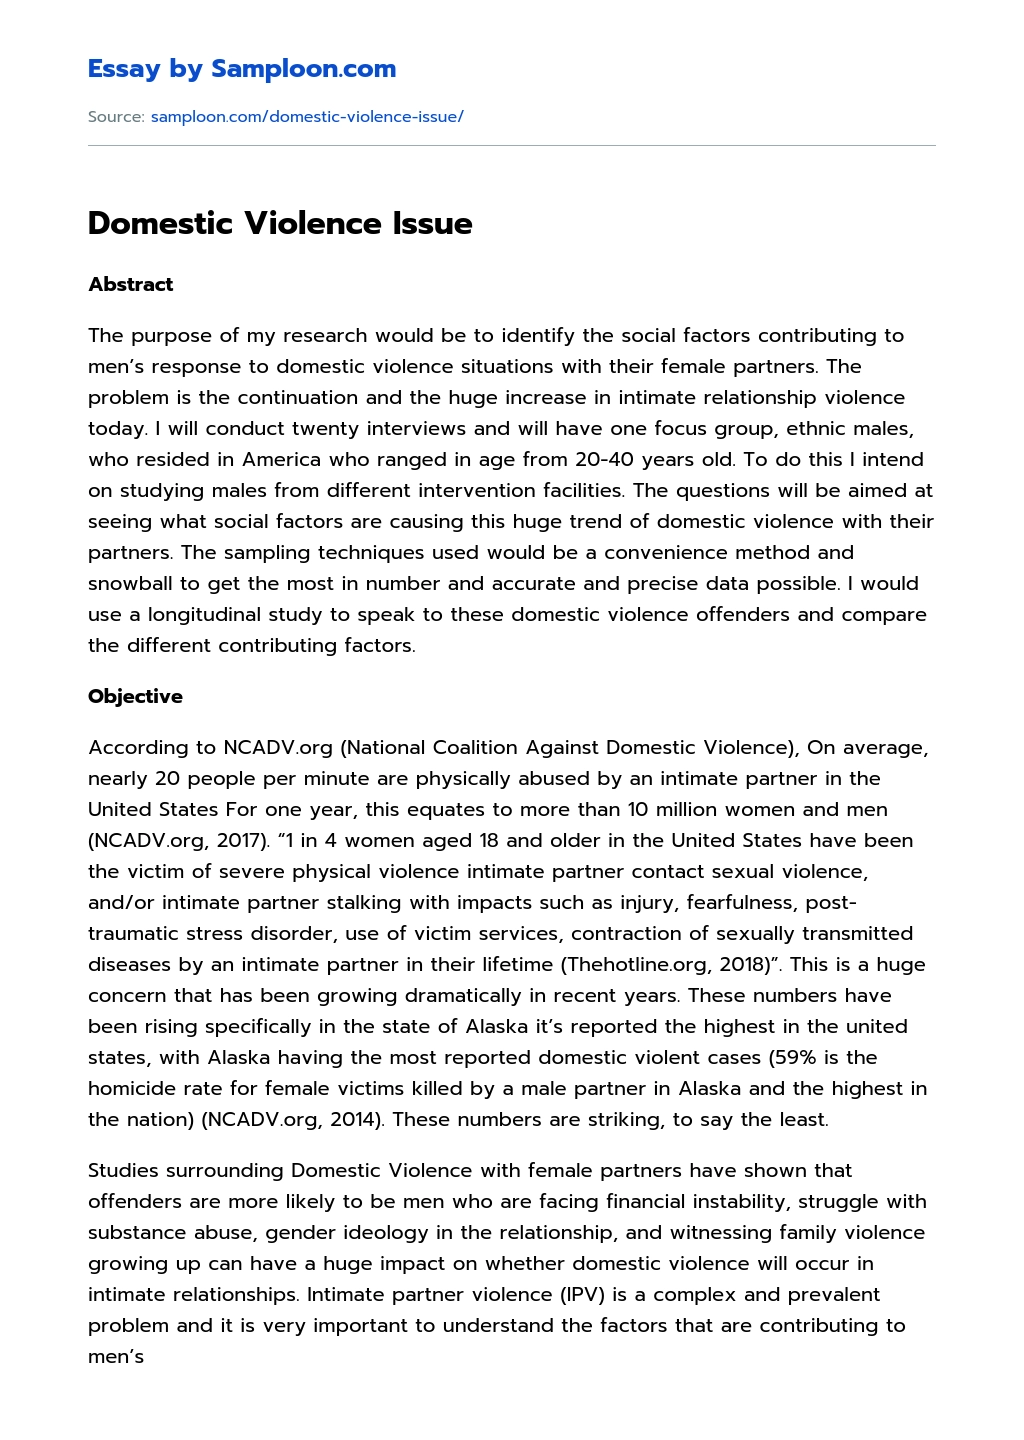 Domestic Violence Issue essay